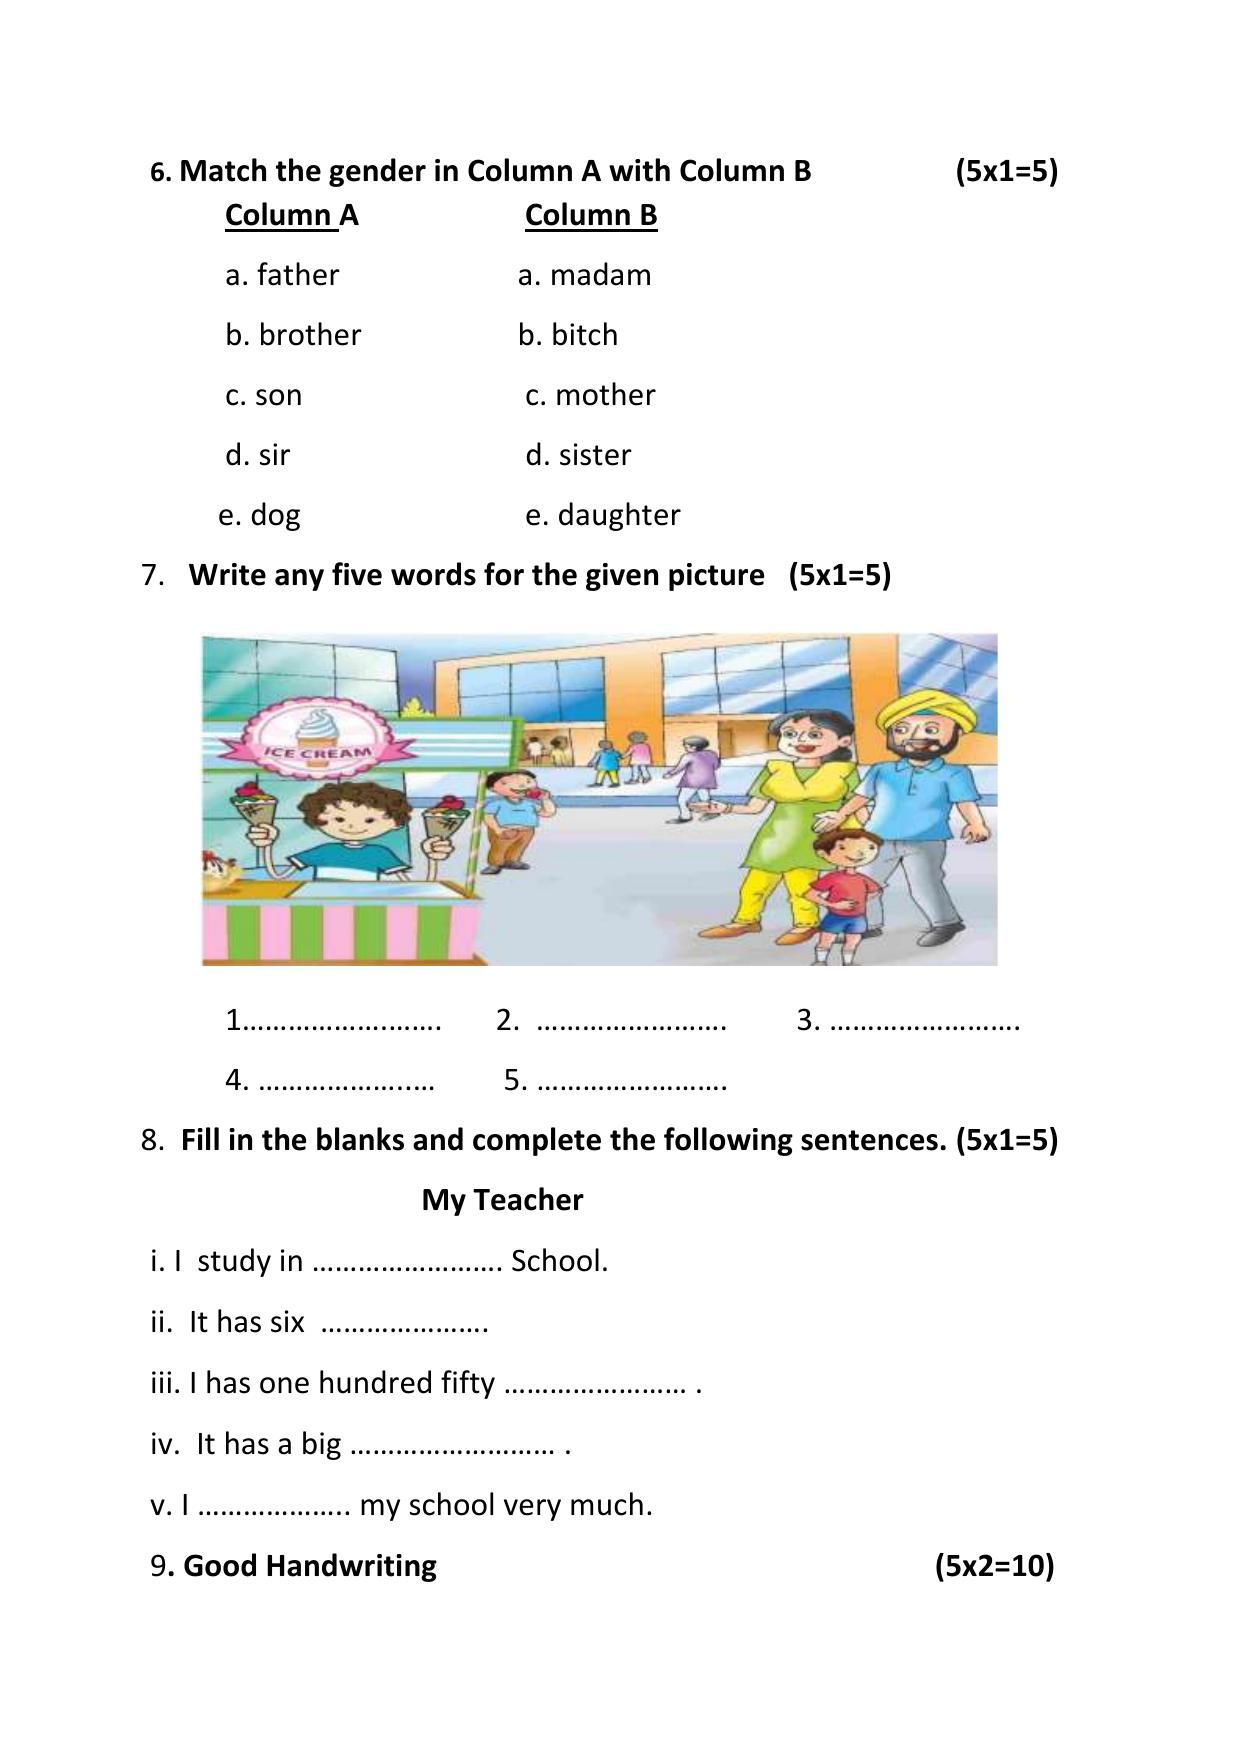 PSEB Class 5 English (DA Students) Model Papers - Page 4